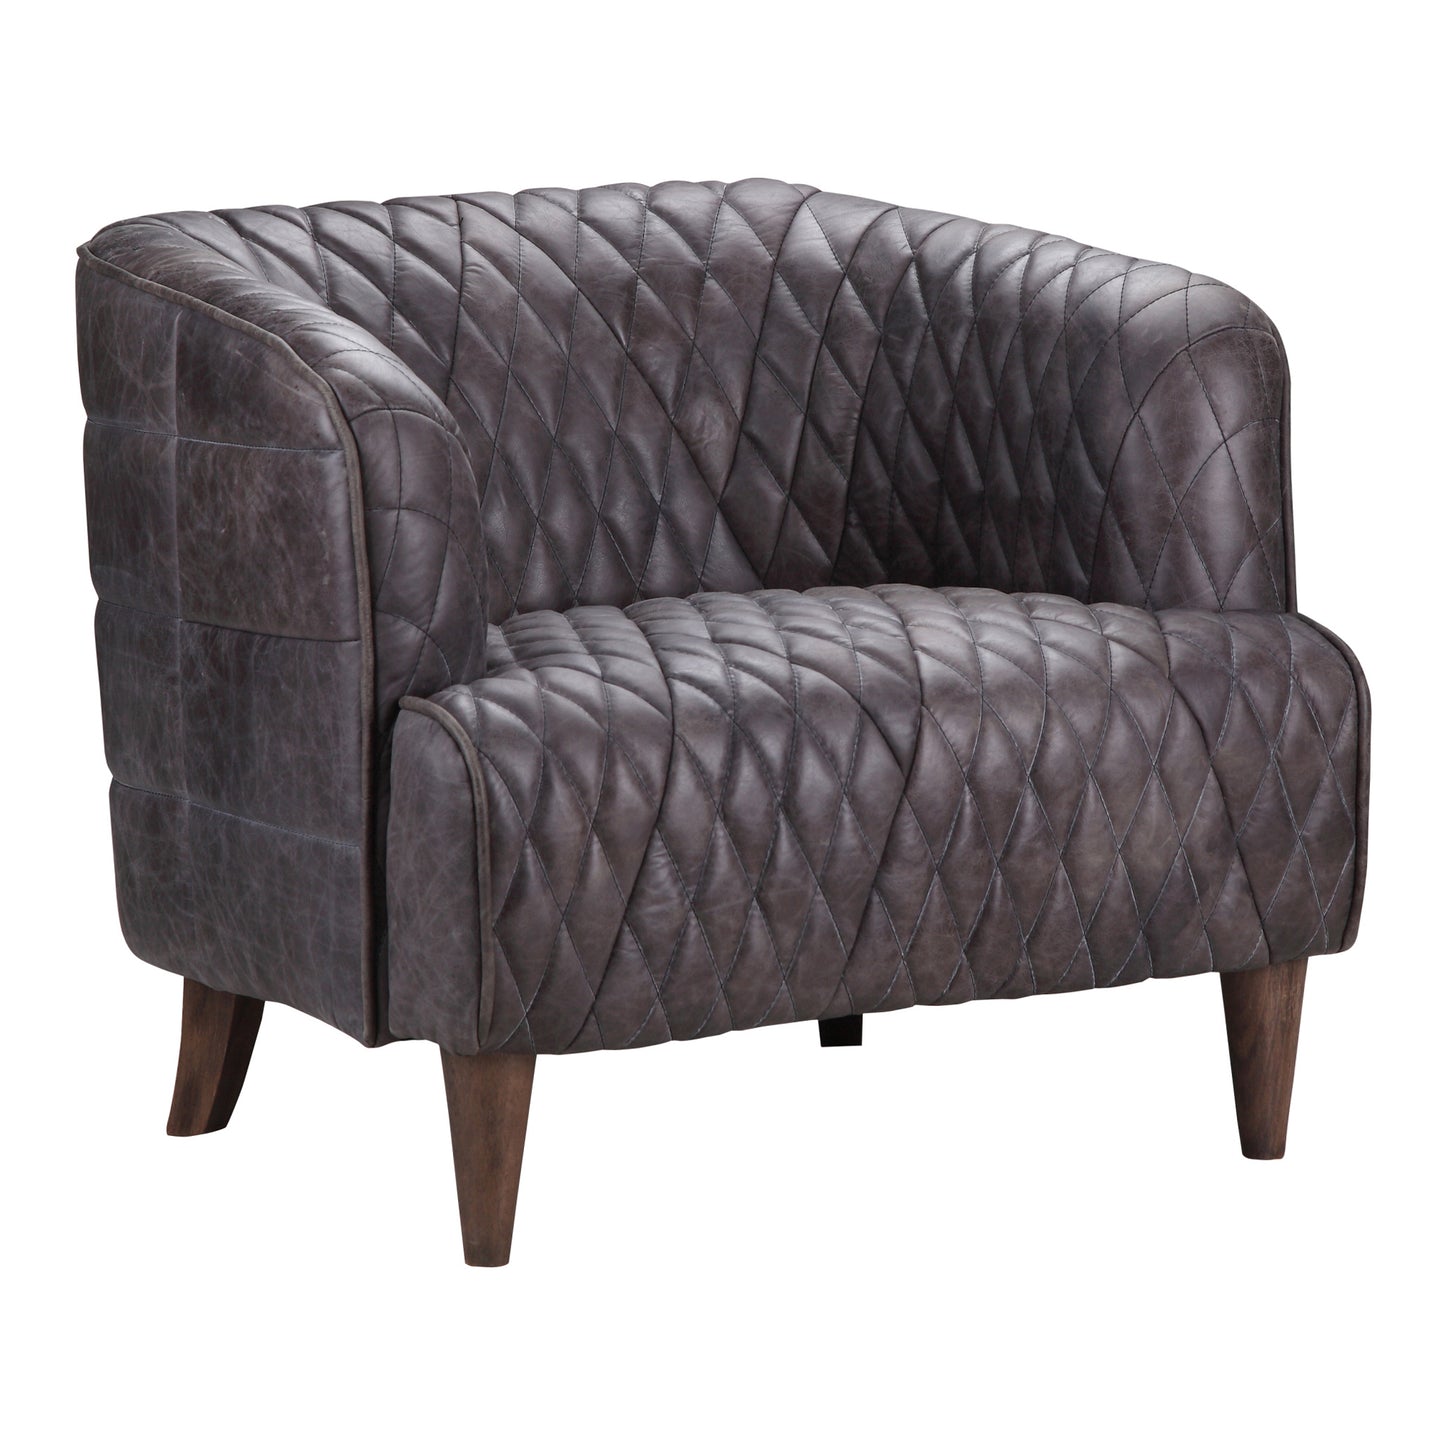 Magdelan Tufted Leather Arm Chair Nimbus Black Leather